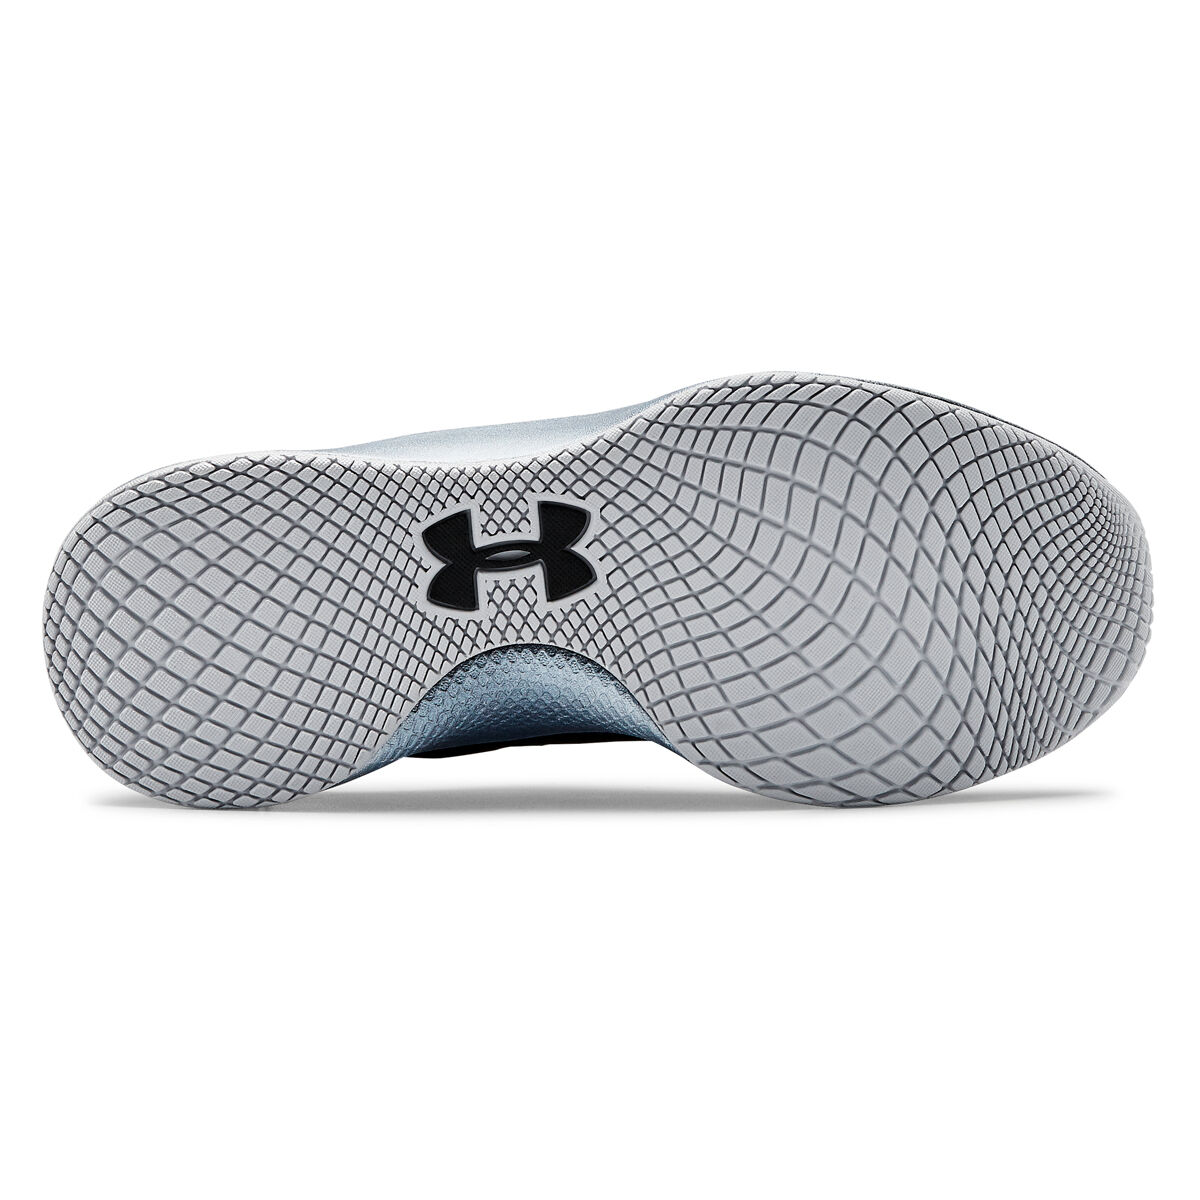 Under Armour Charged Breathe TR 2.0 